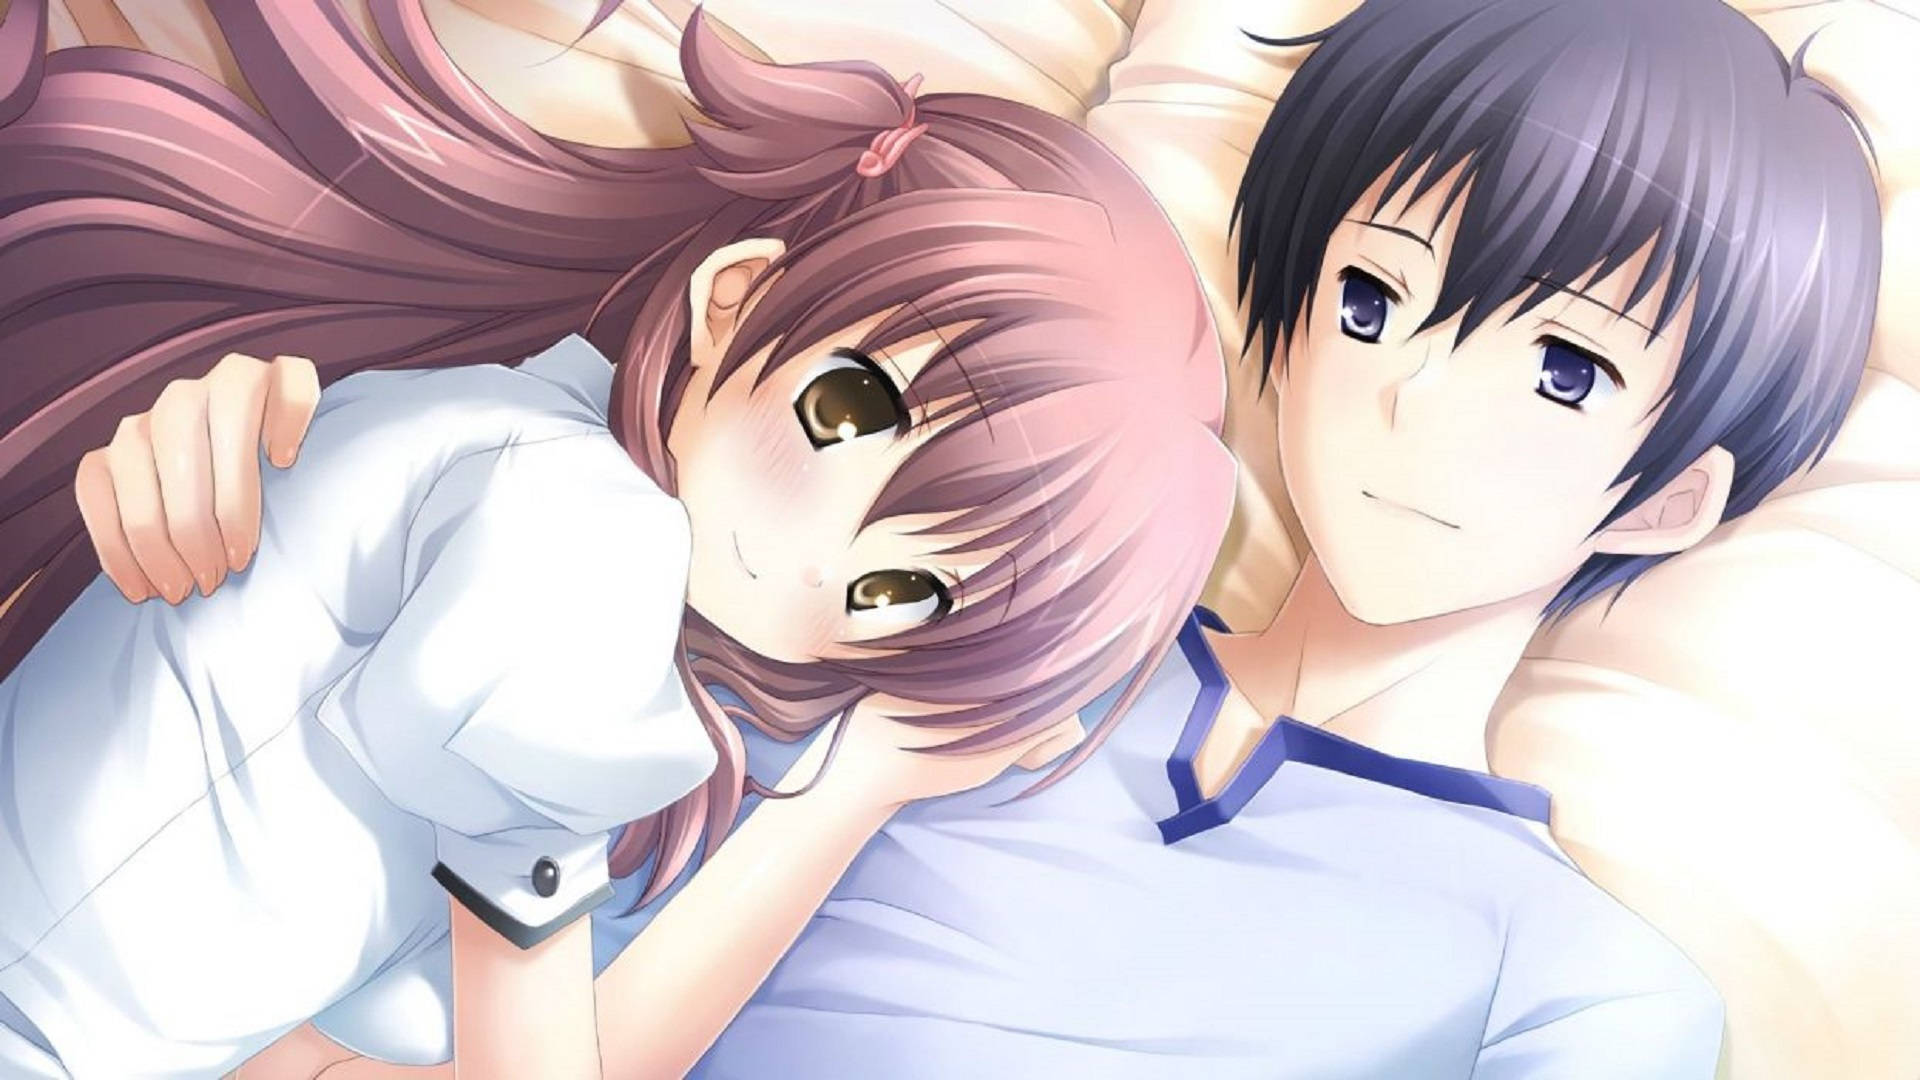 Anime Hug Boy And Girl In Bed Wallpaper